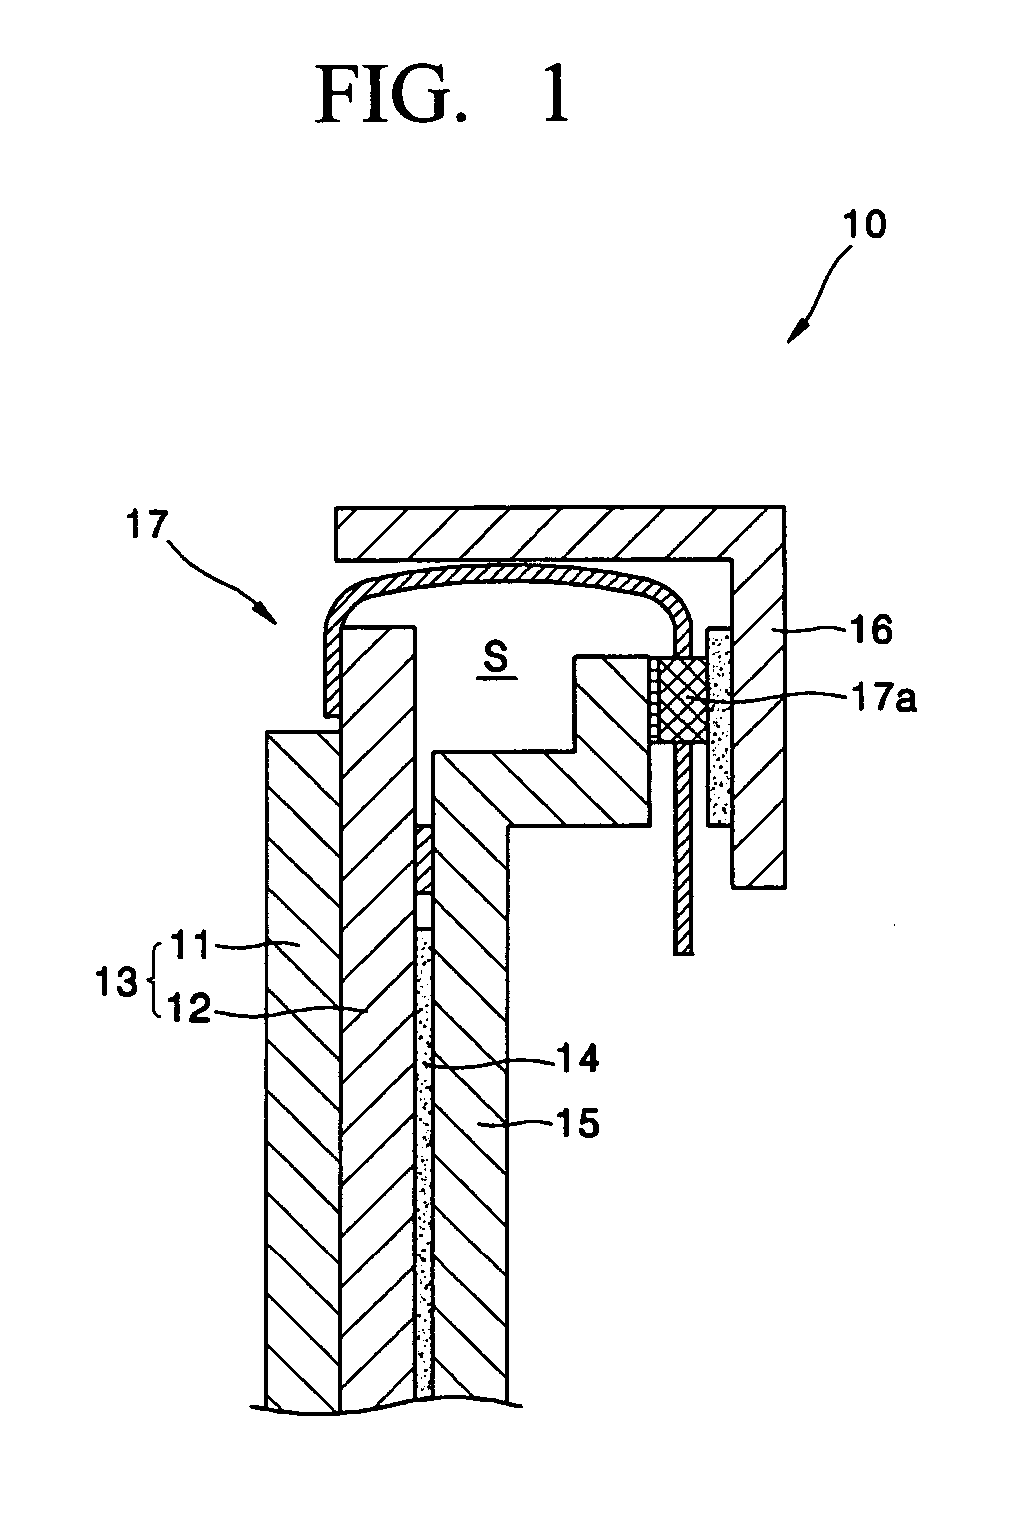 Device having improved heat dissipation